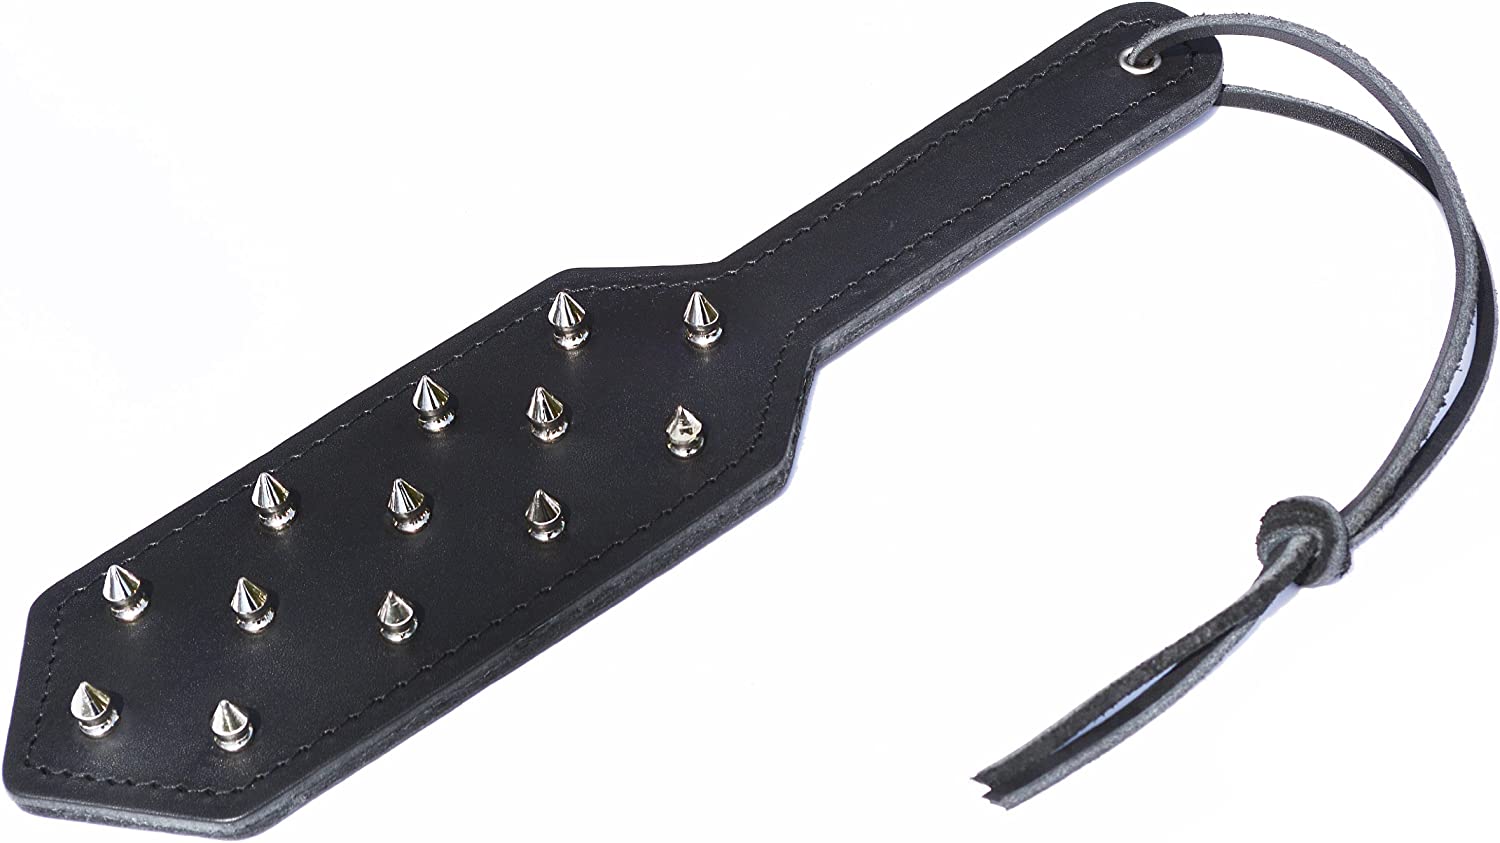 Spiked Paddle – Dungeonware Leather